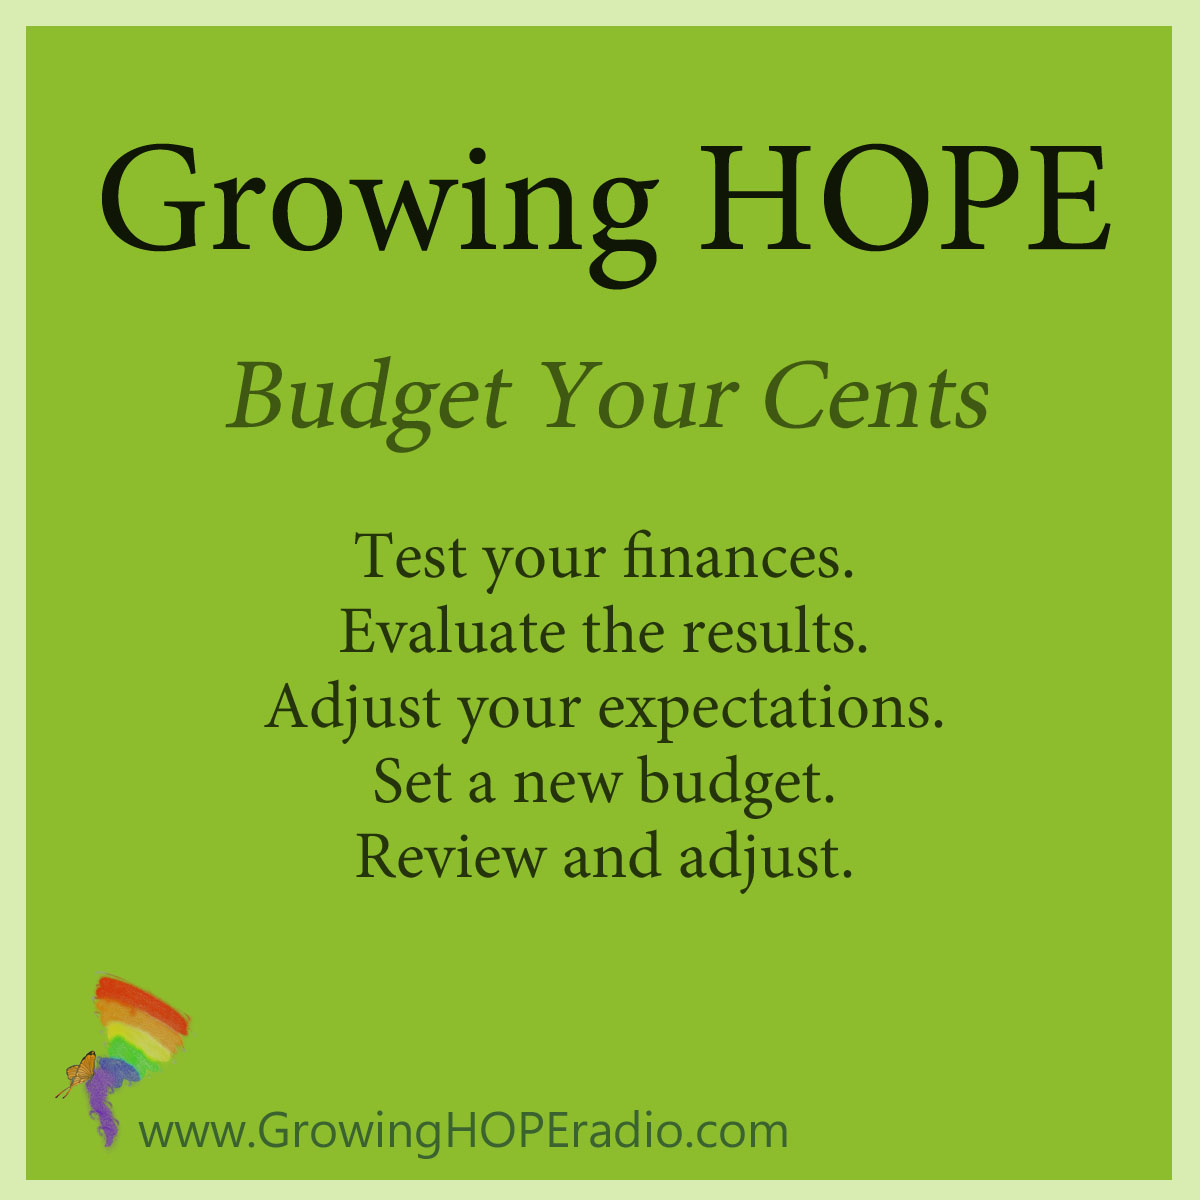 GrowingHOPE daily - five tips to budget your cents